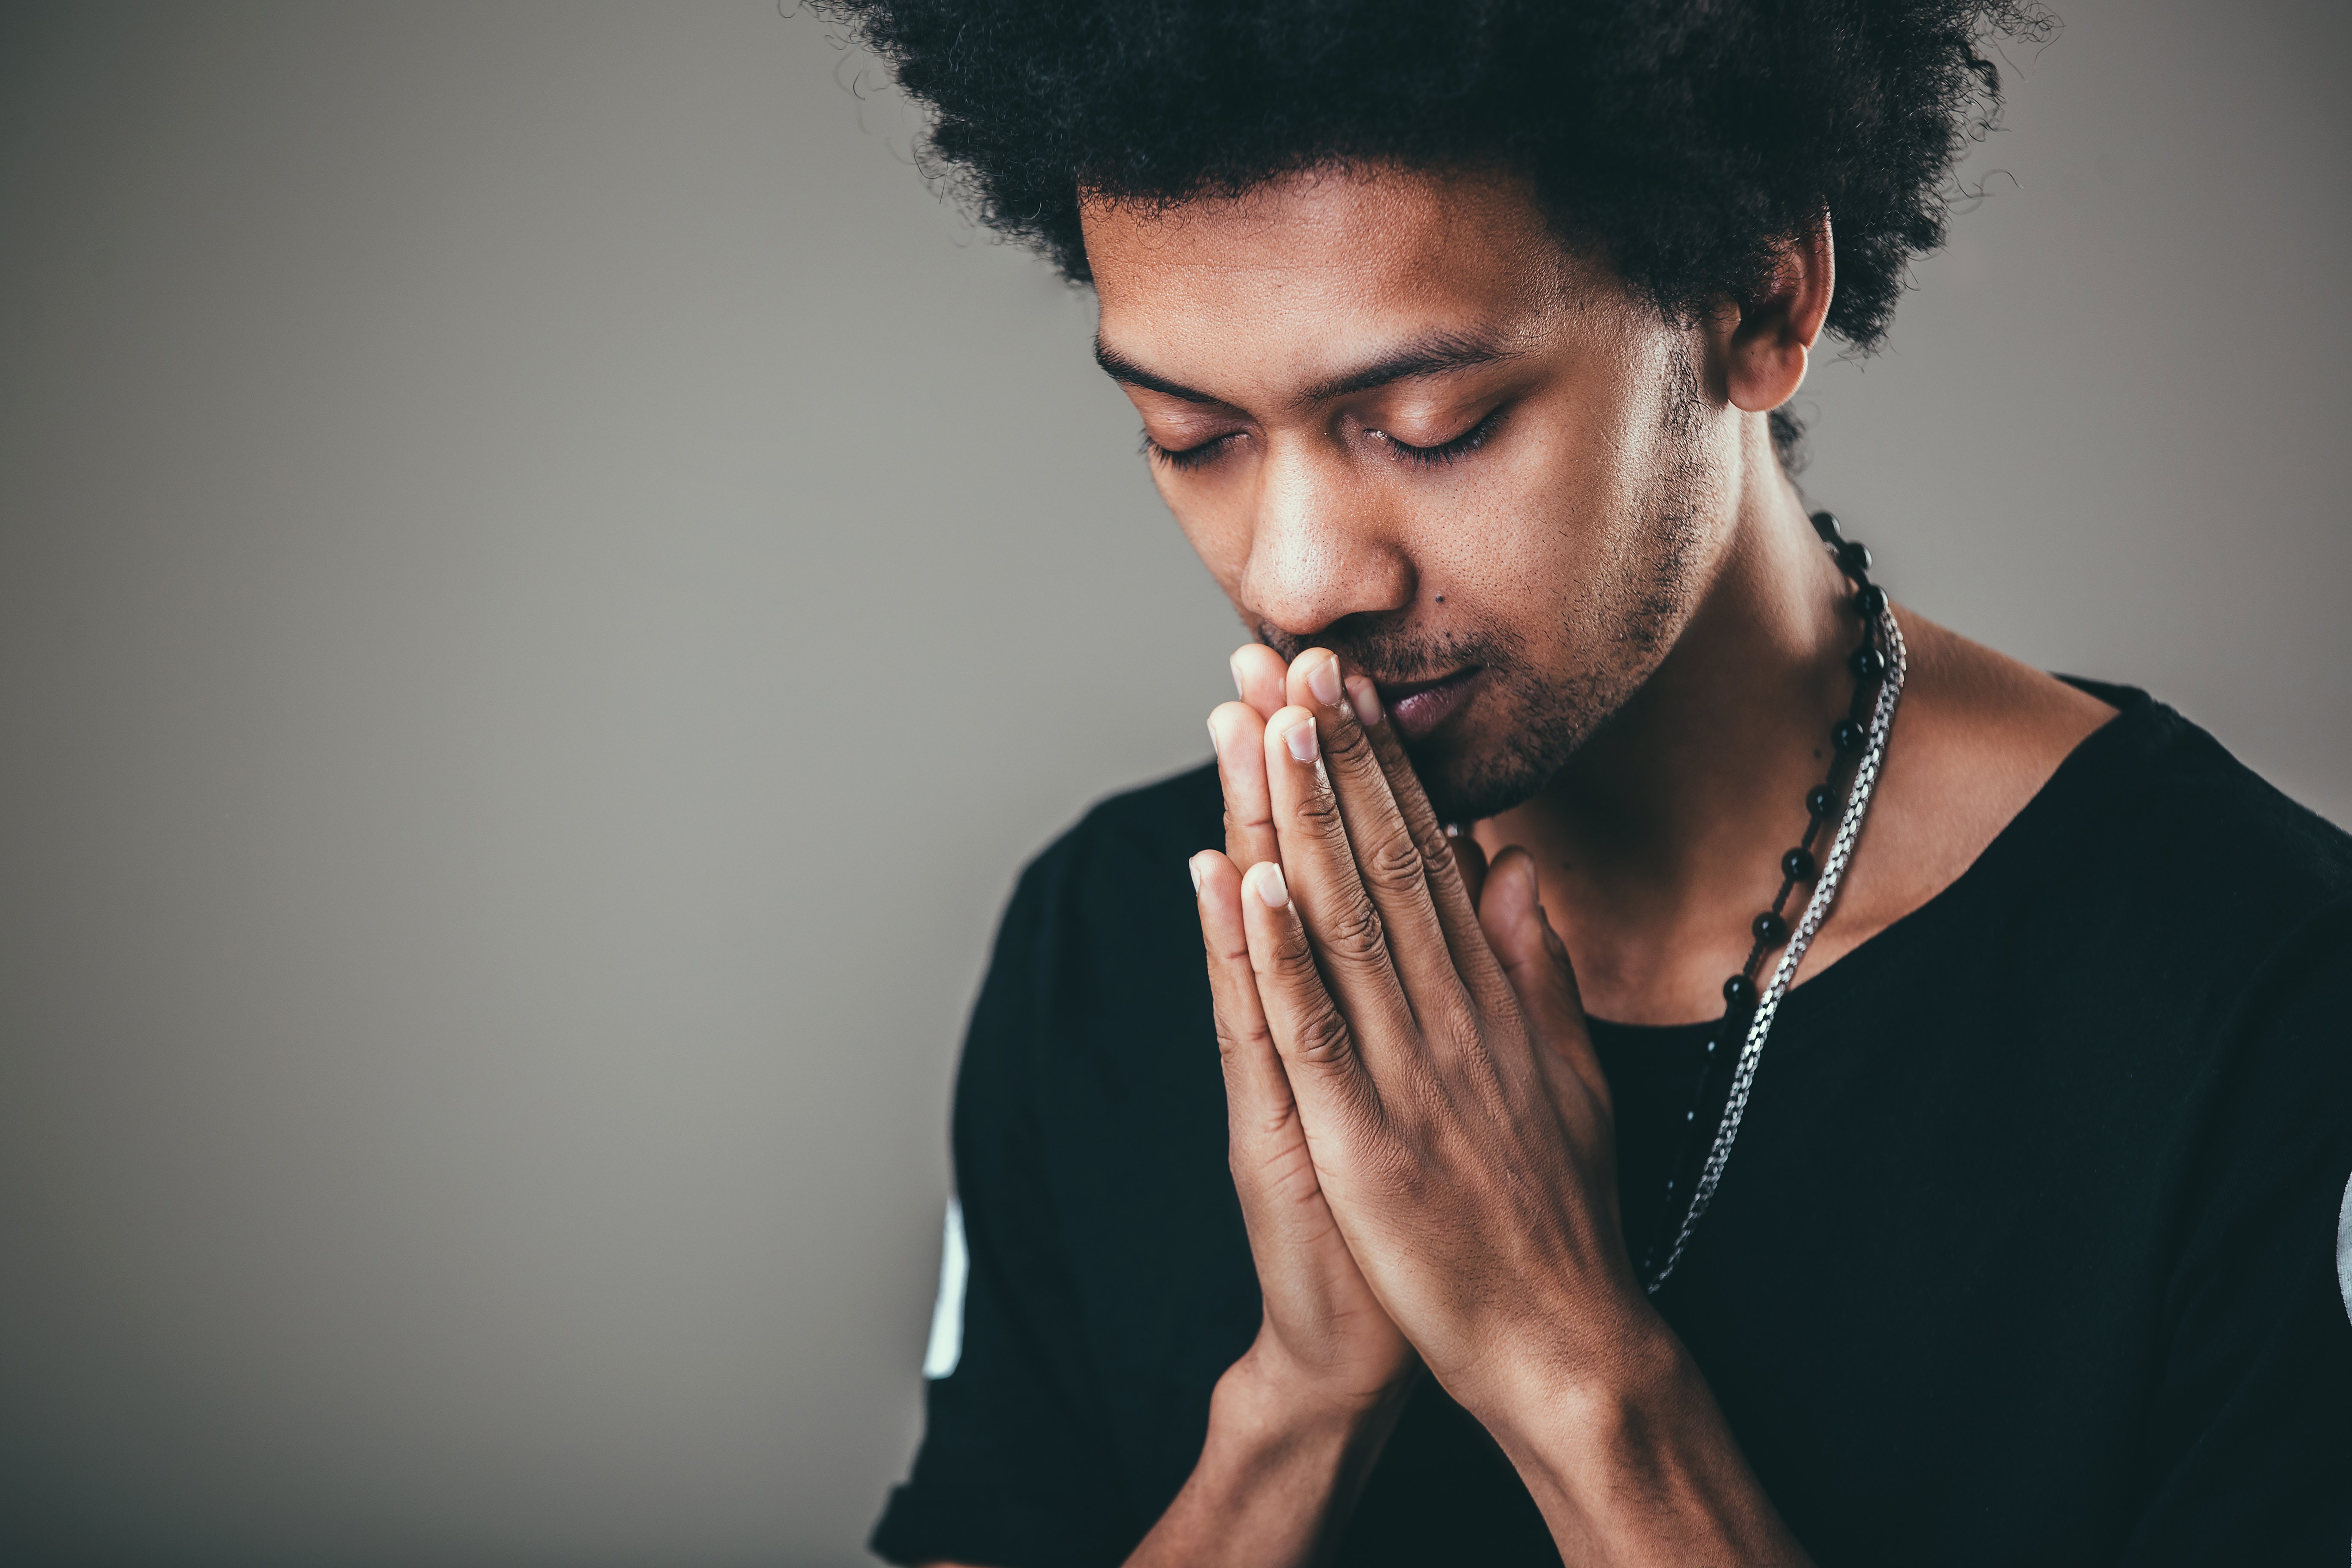 A person praying. | Source: Shutterstock 